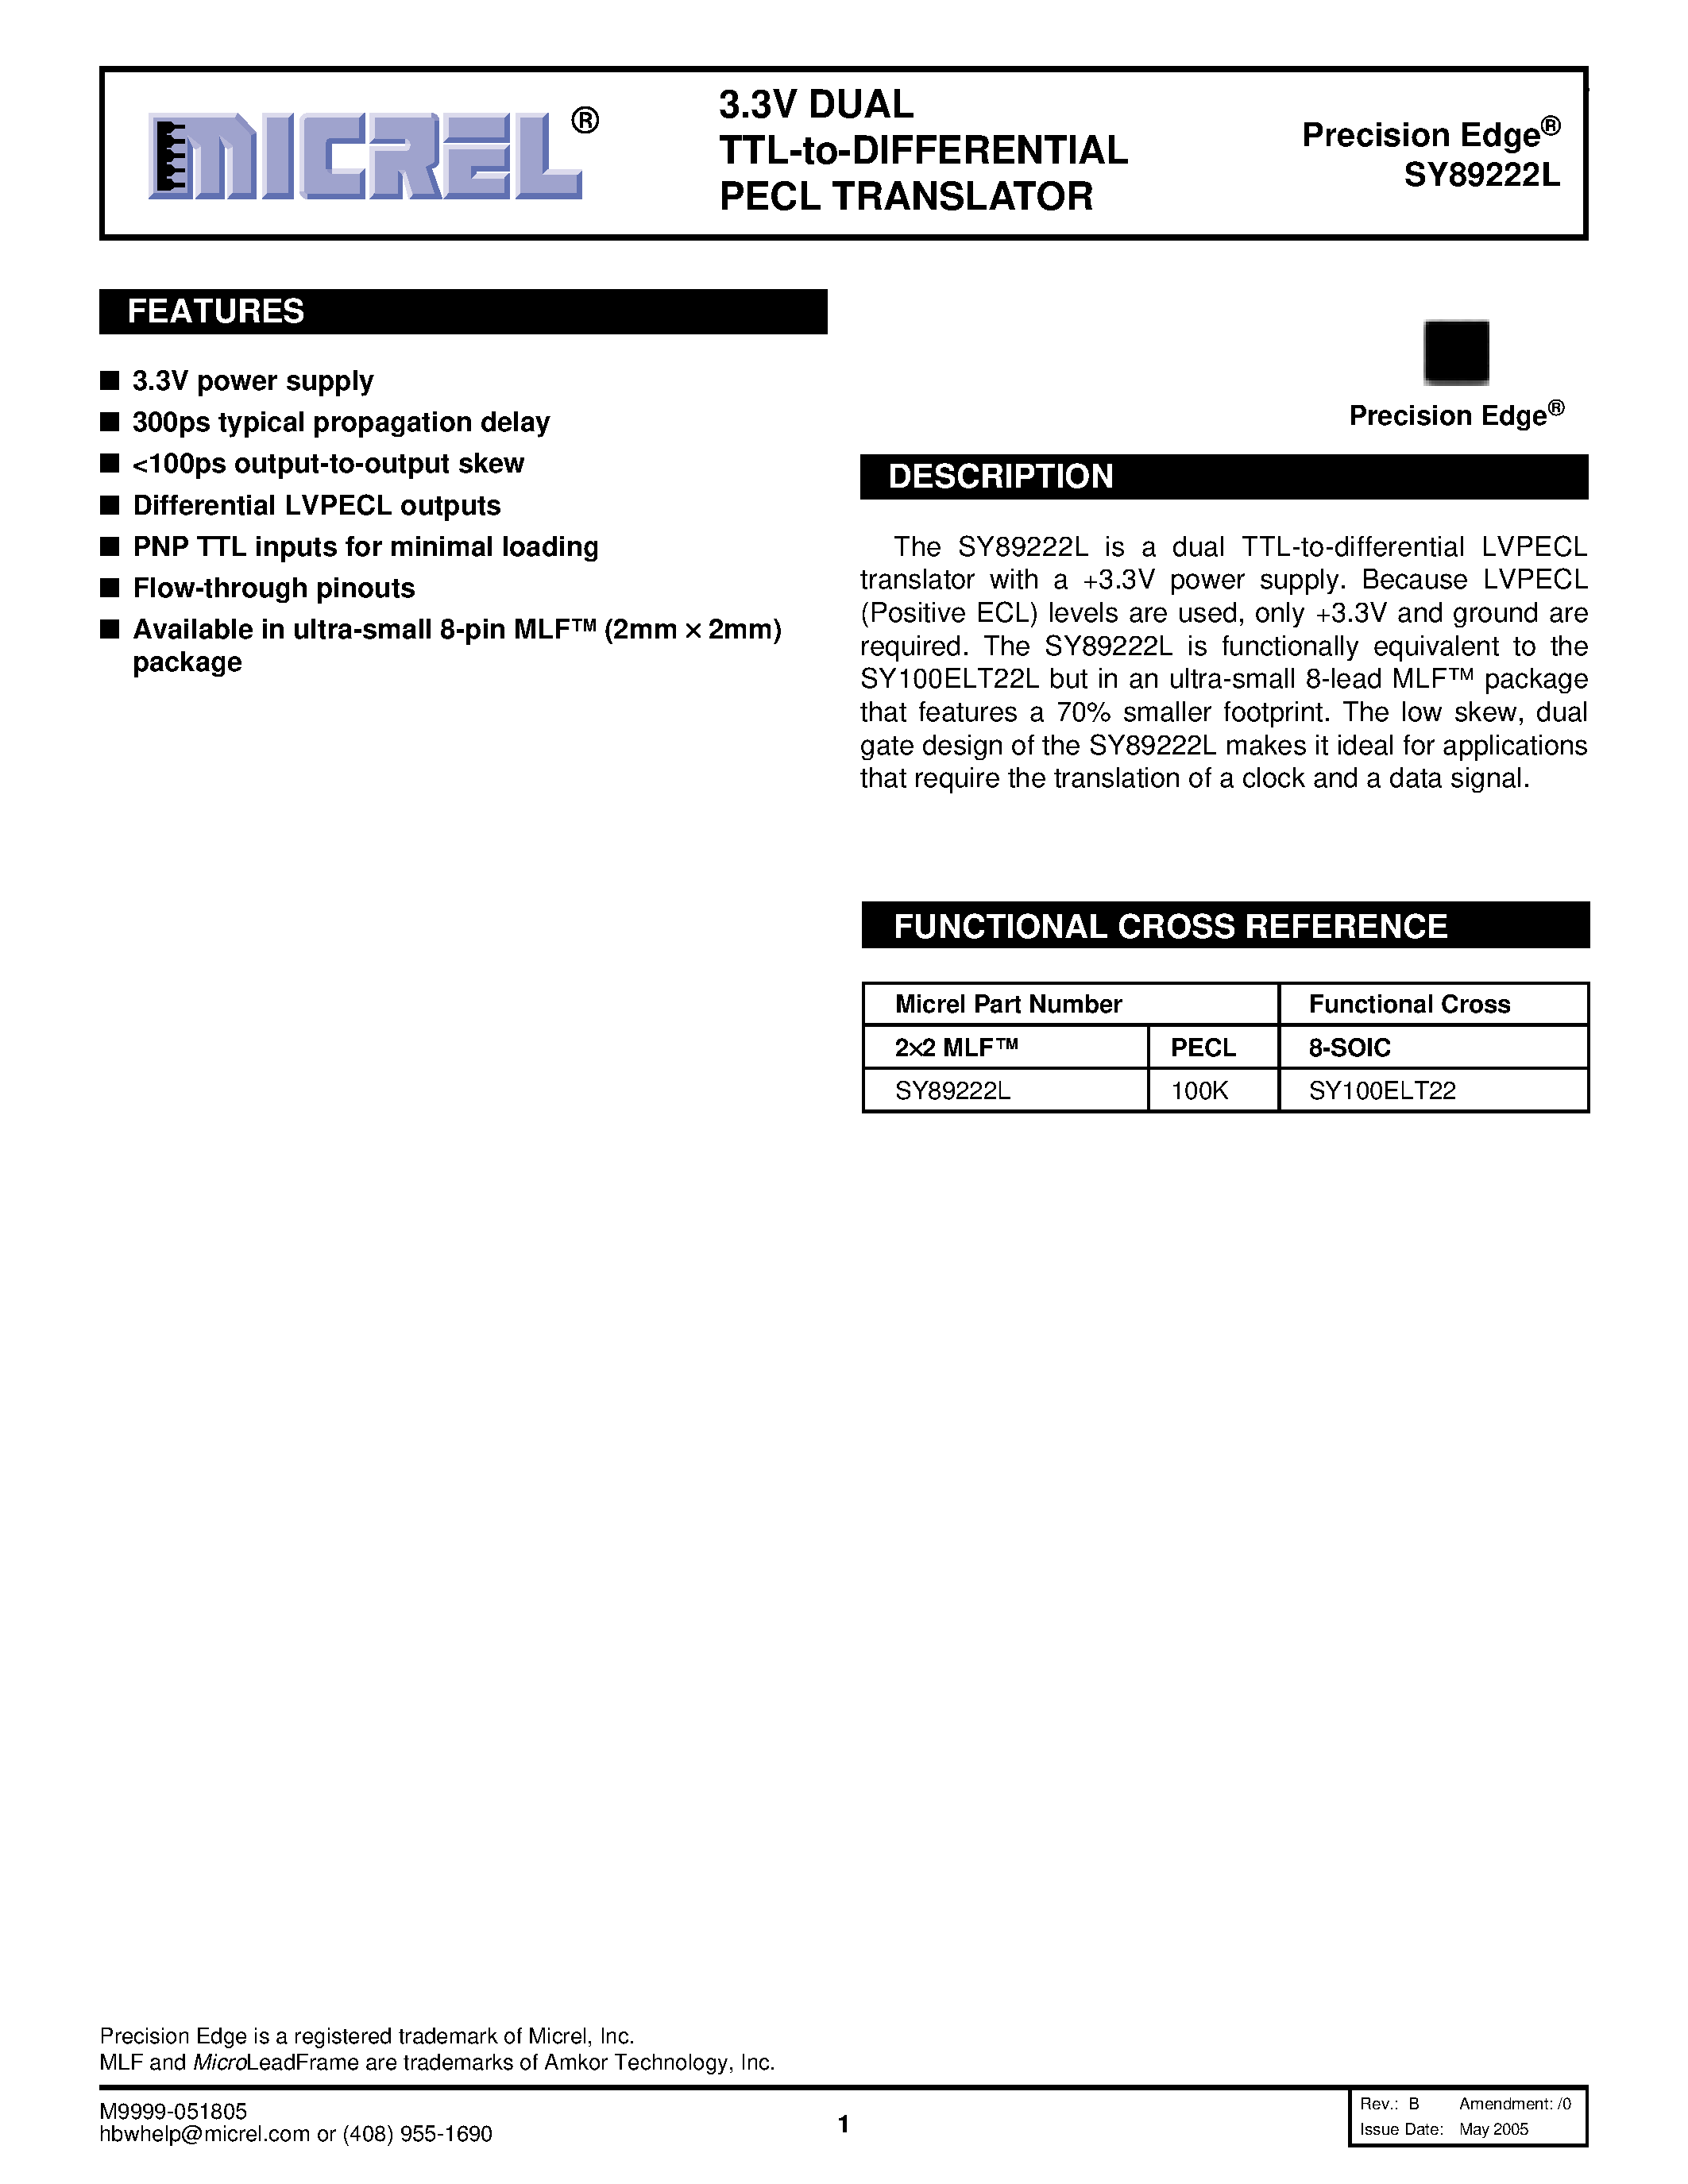 Datasheet SY89222L - 3.3V DUAL TTL-to-DIFFERENTIAL PECL TRANSLATOR page 1